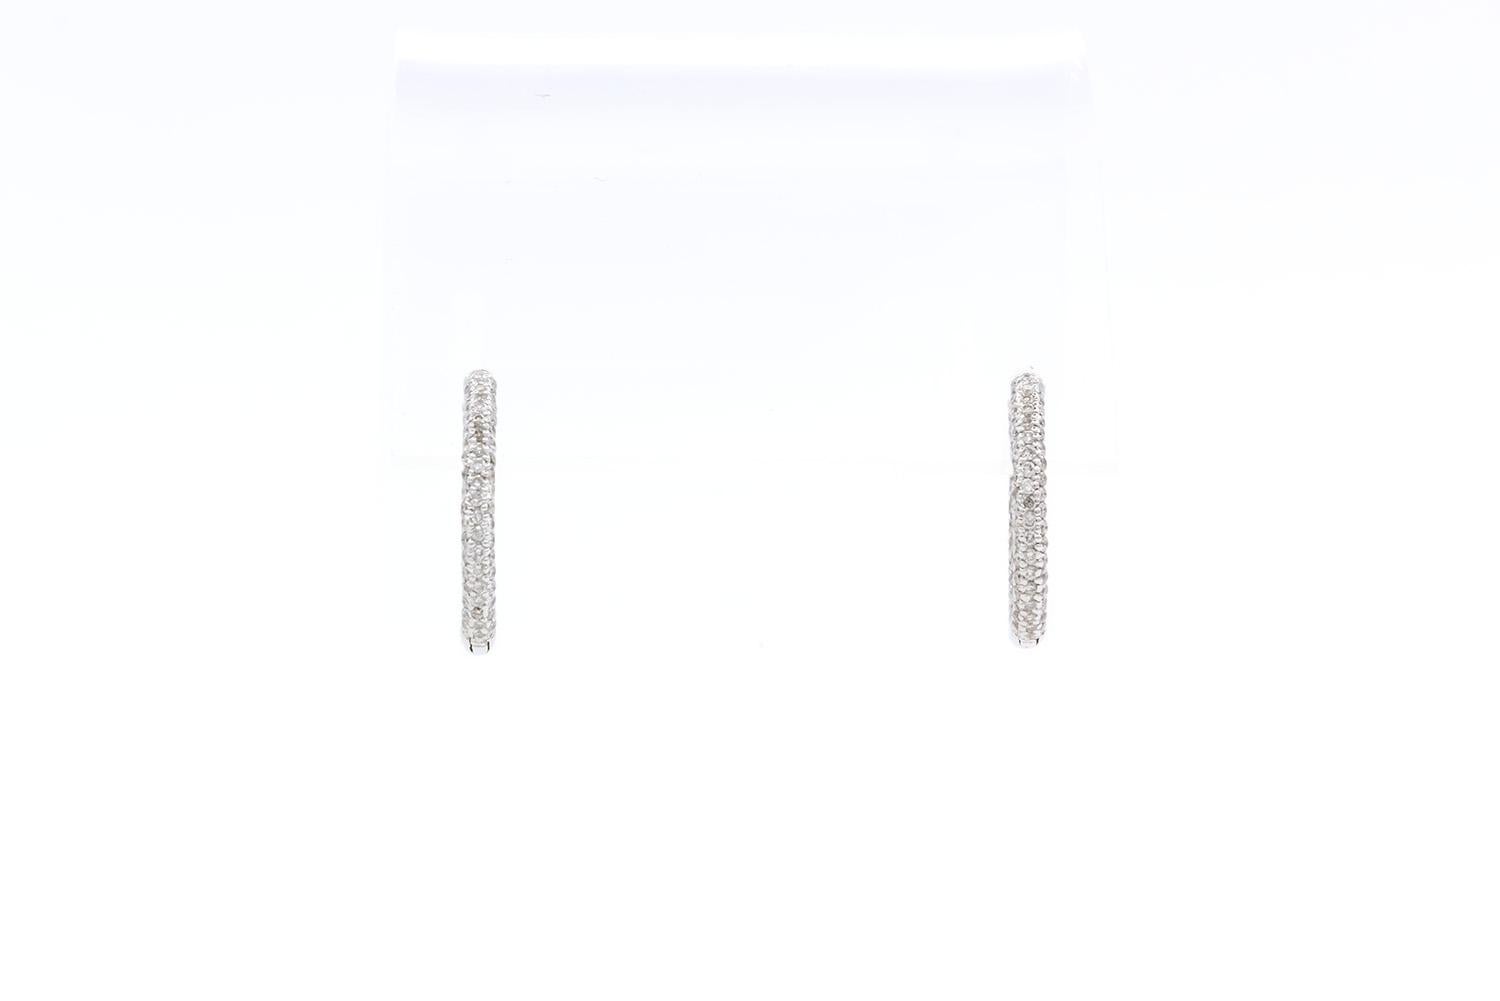 We are pleased to present these 18K White Gold & Inside Outside Diamond Hoop Earrings. These beautiful earrings feature an estimated 2.04ctw G-H/VS-SI Round Brilliant Cut Diamonds set in 18k White Gold 3/4